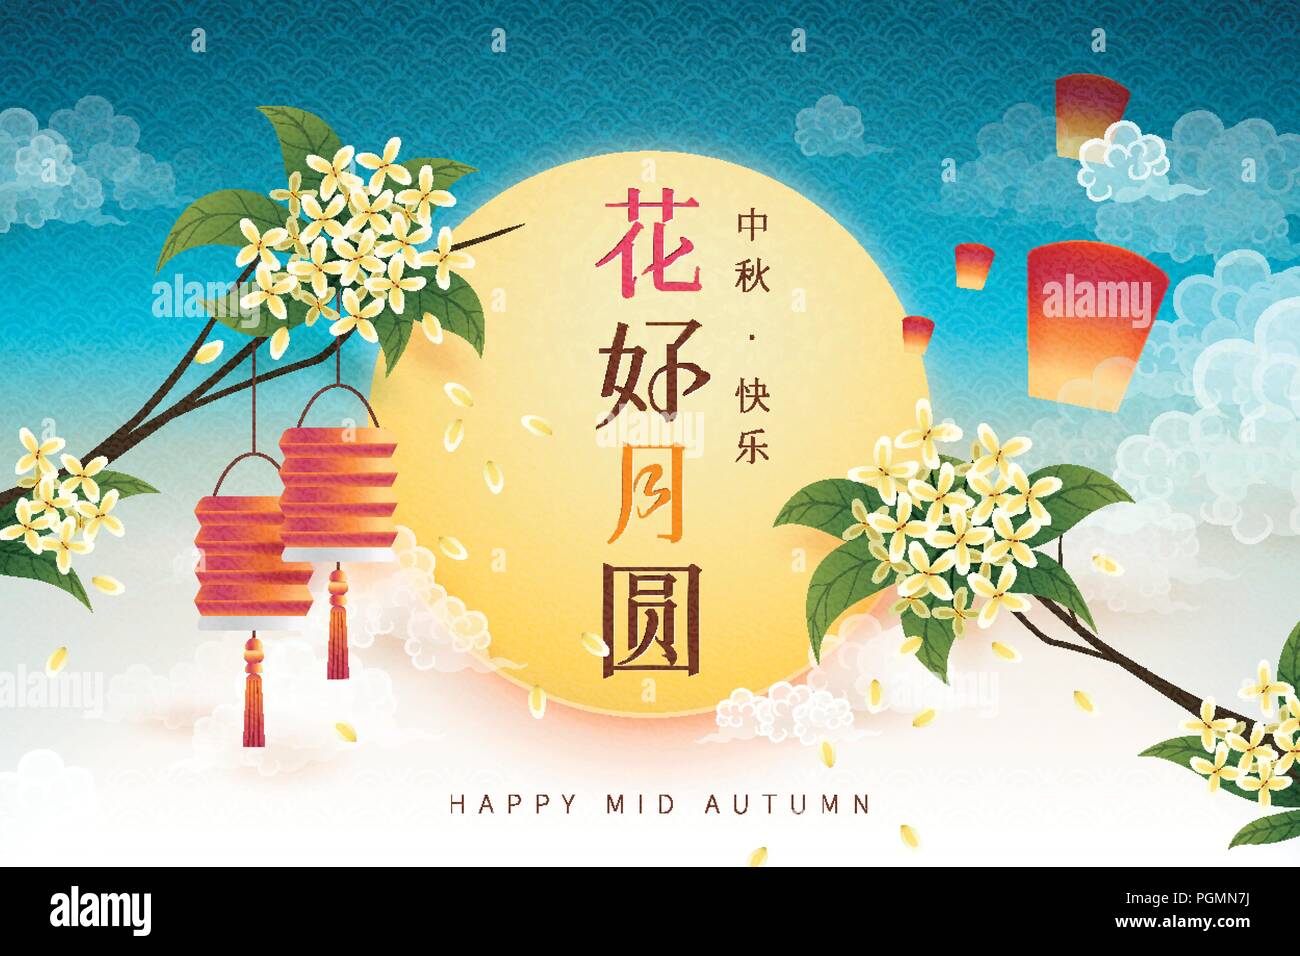 Mid autumn festival design with blooming flower and the full moon written in Chinese, osmanthus and lanterns elements Stock Vector